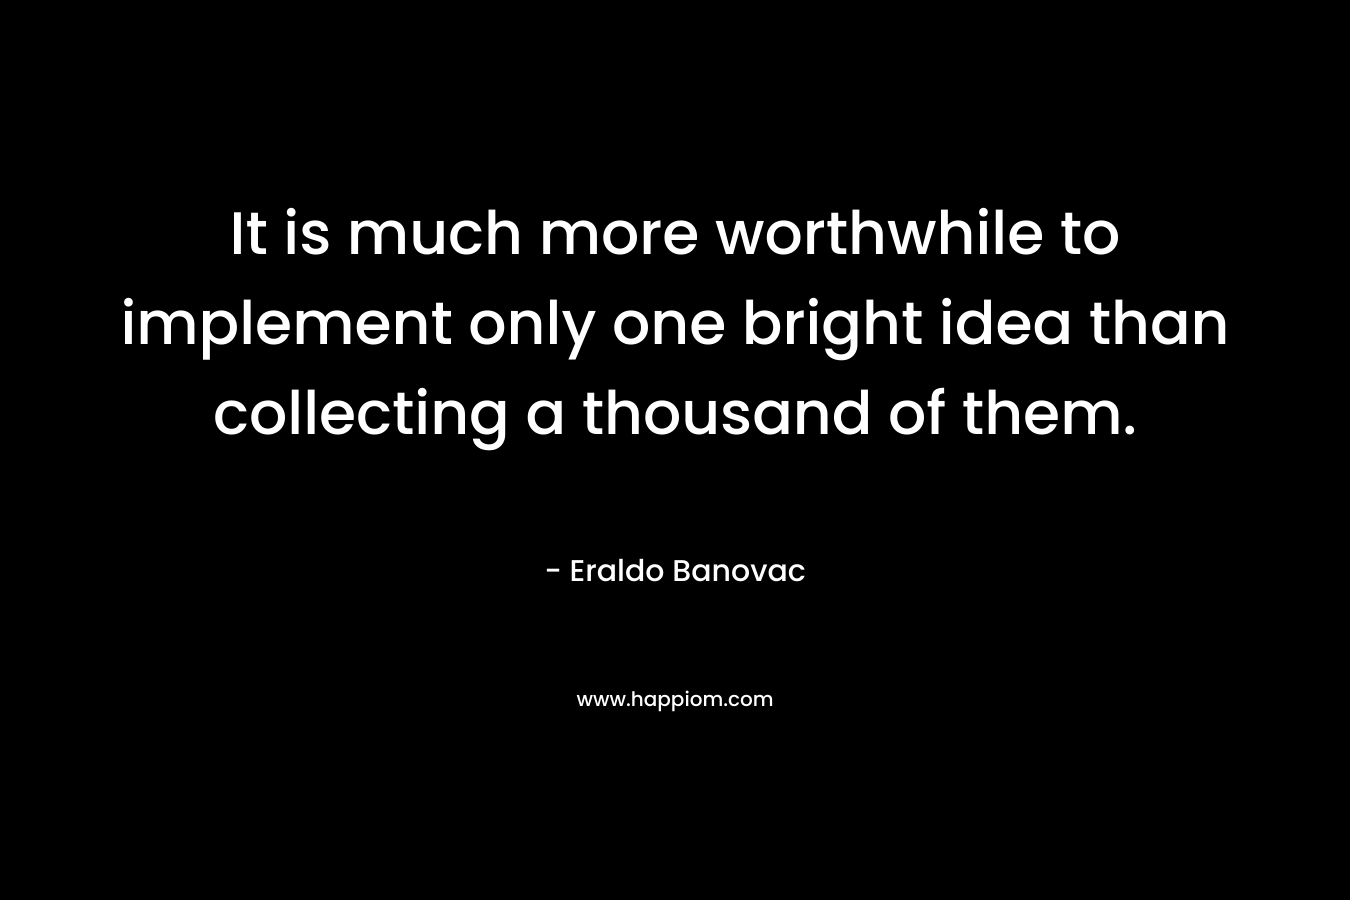 It is much more worthwhile to implement only one bright idea than collecting a thousand of them. – Eraldo Banovac